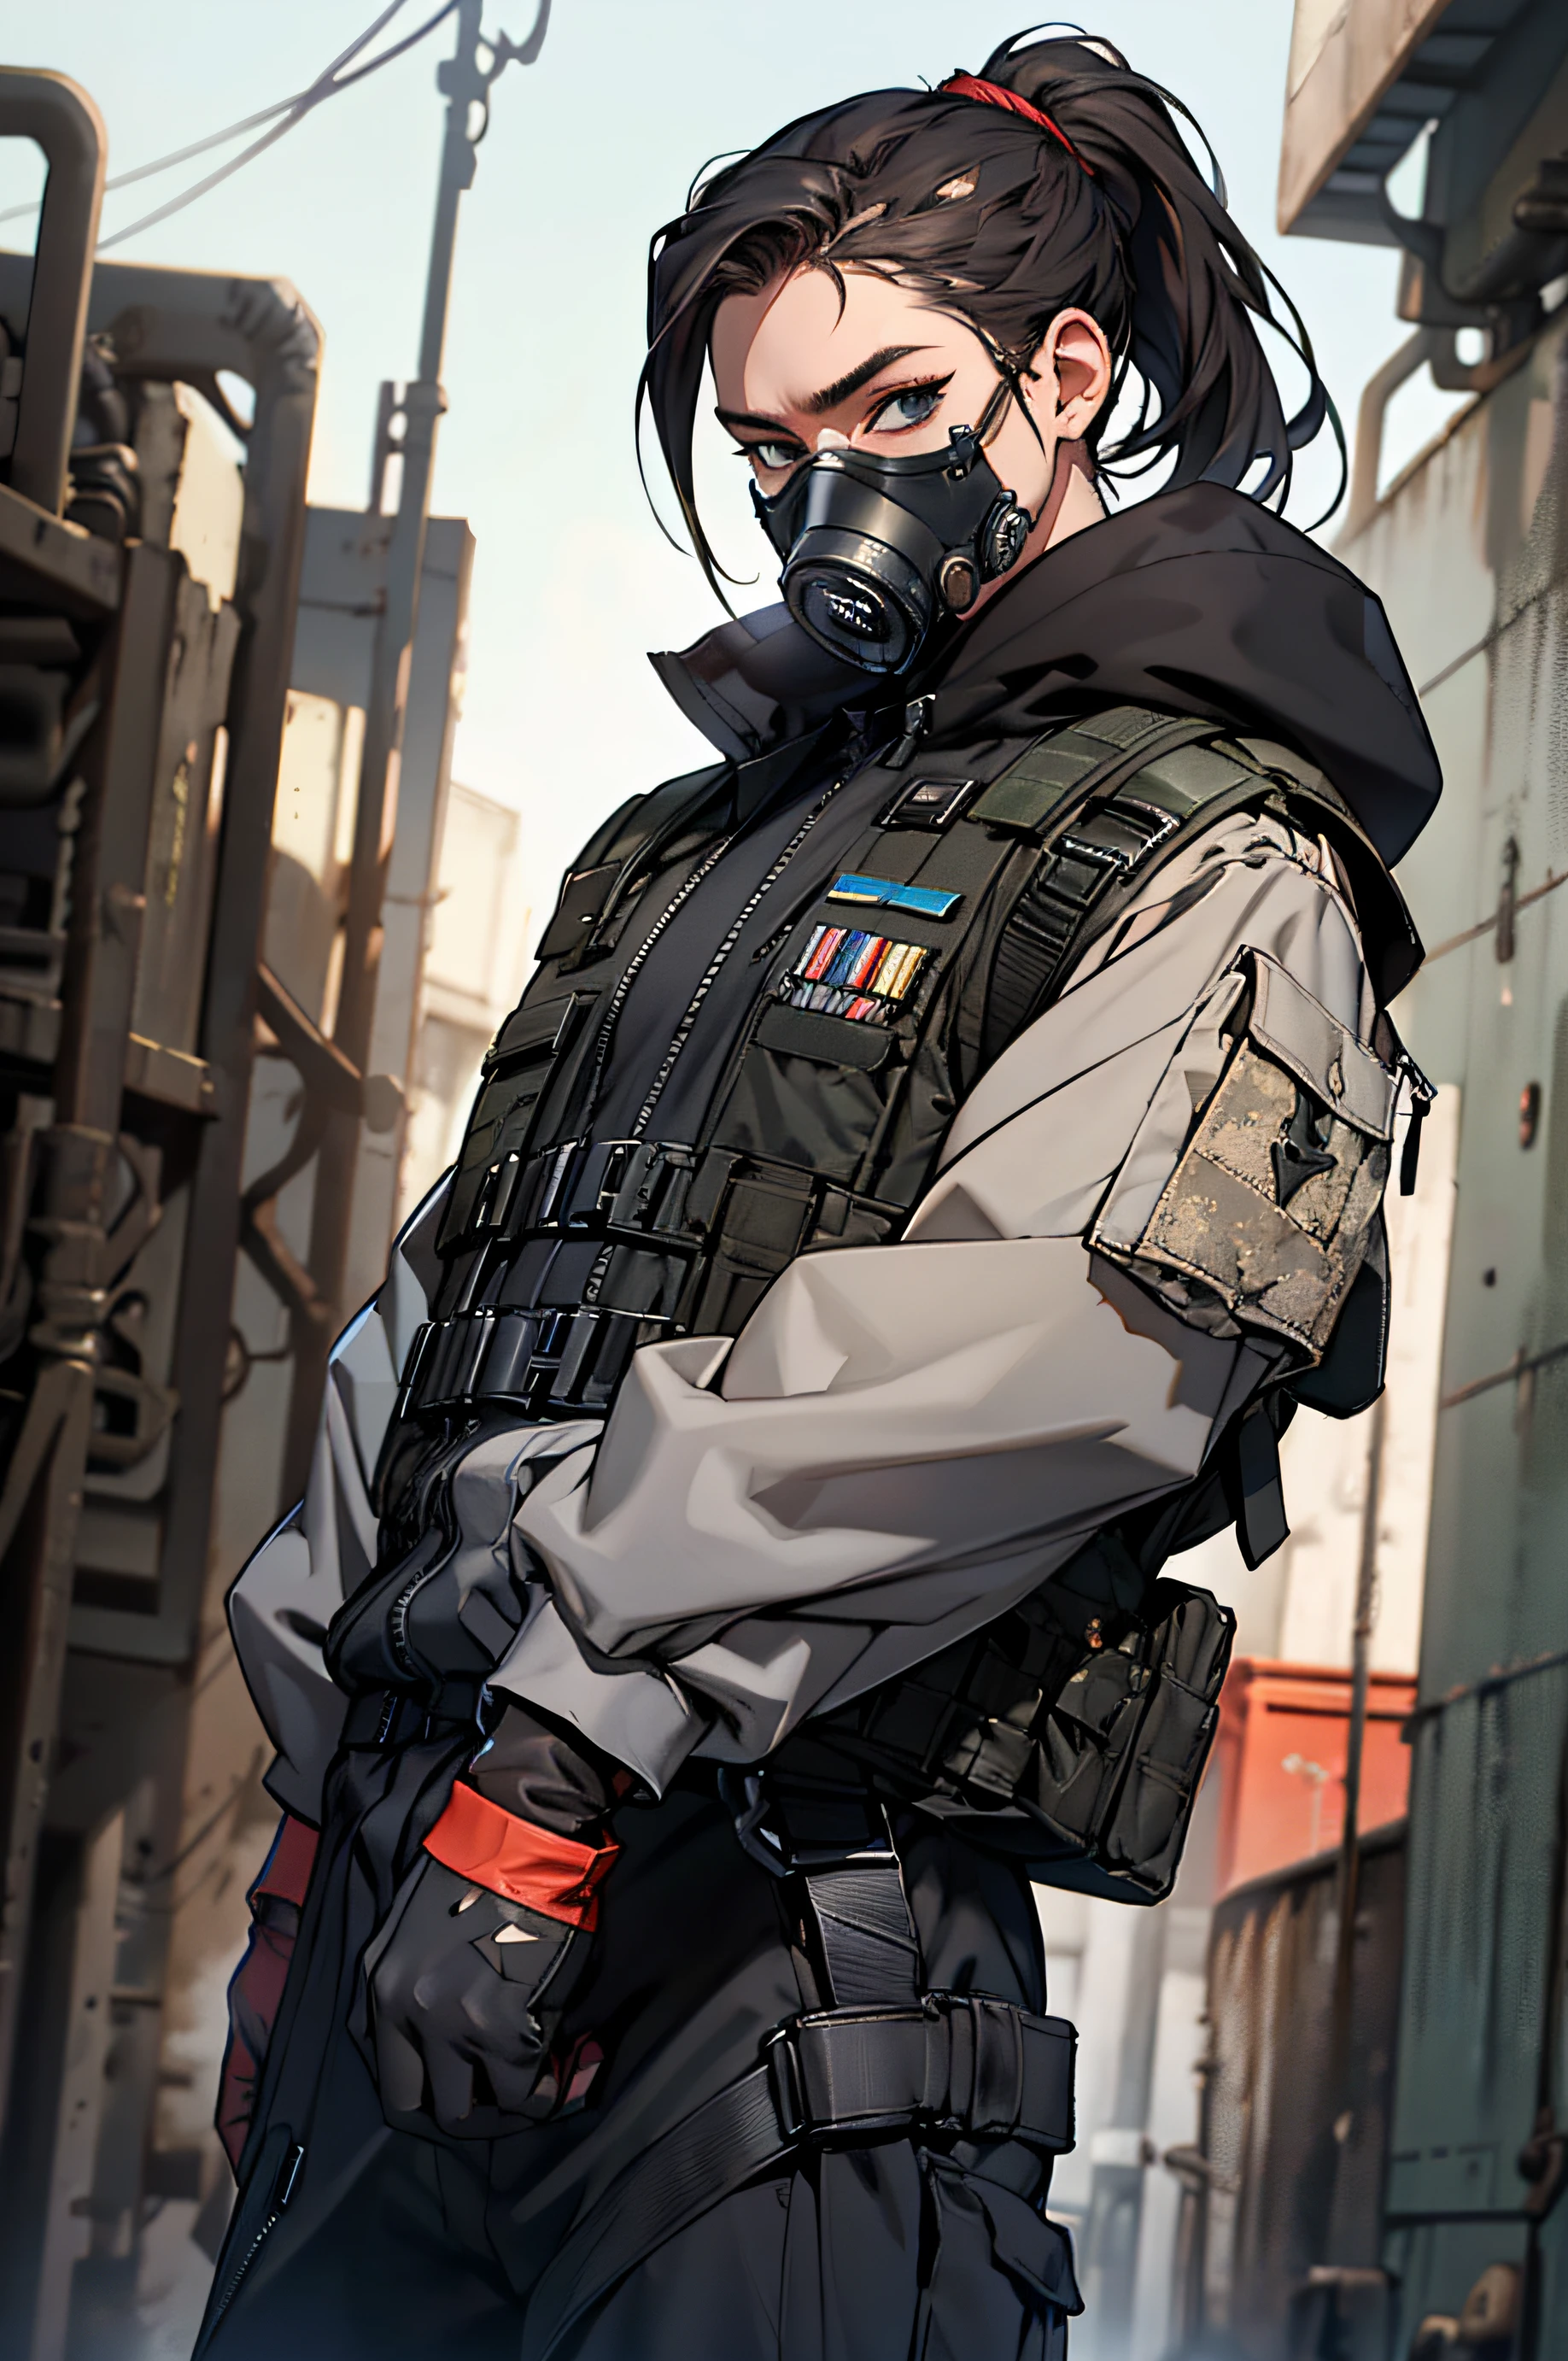 (Masterpiece), best quality, highest quality, highly detailed, original, high resolution CG Unit 8k wallpaper, (depth of field: 1.5), fidelity: 1.3, male, black skin, tied hair in ponytail, gas mask, black military uniform, tactical vest, gloves, jacket with hood over head, background military base